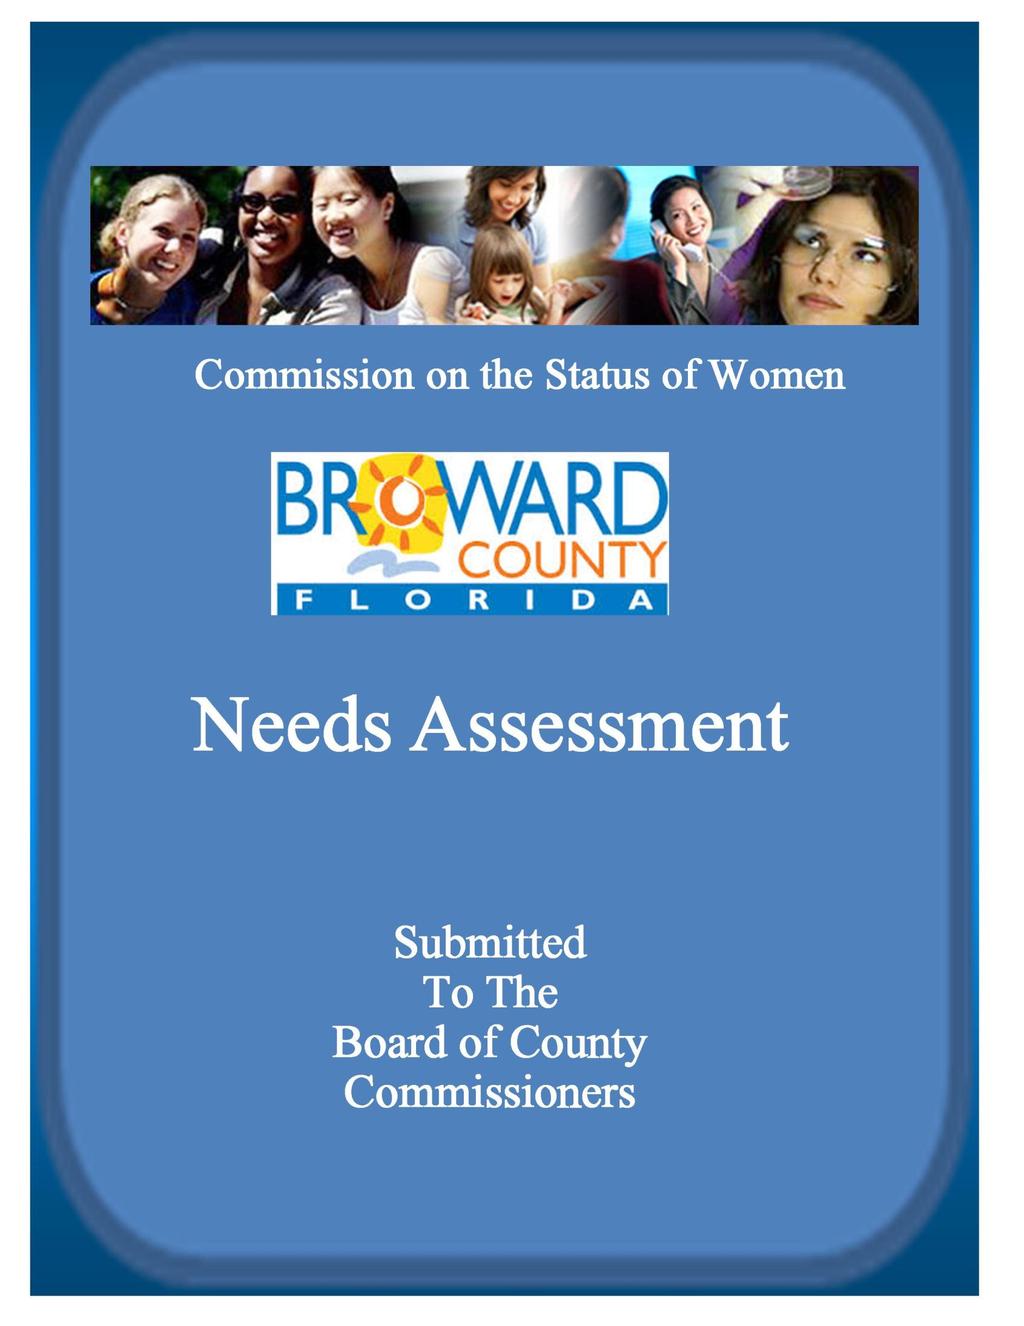 5/20/2014 May 14, 2014 Table of Contents The current and immediate past members of the Broward County Commission on the Status of Women (CSW) expresses deep gratitude and appreciation to the